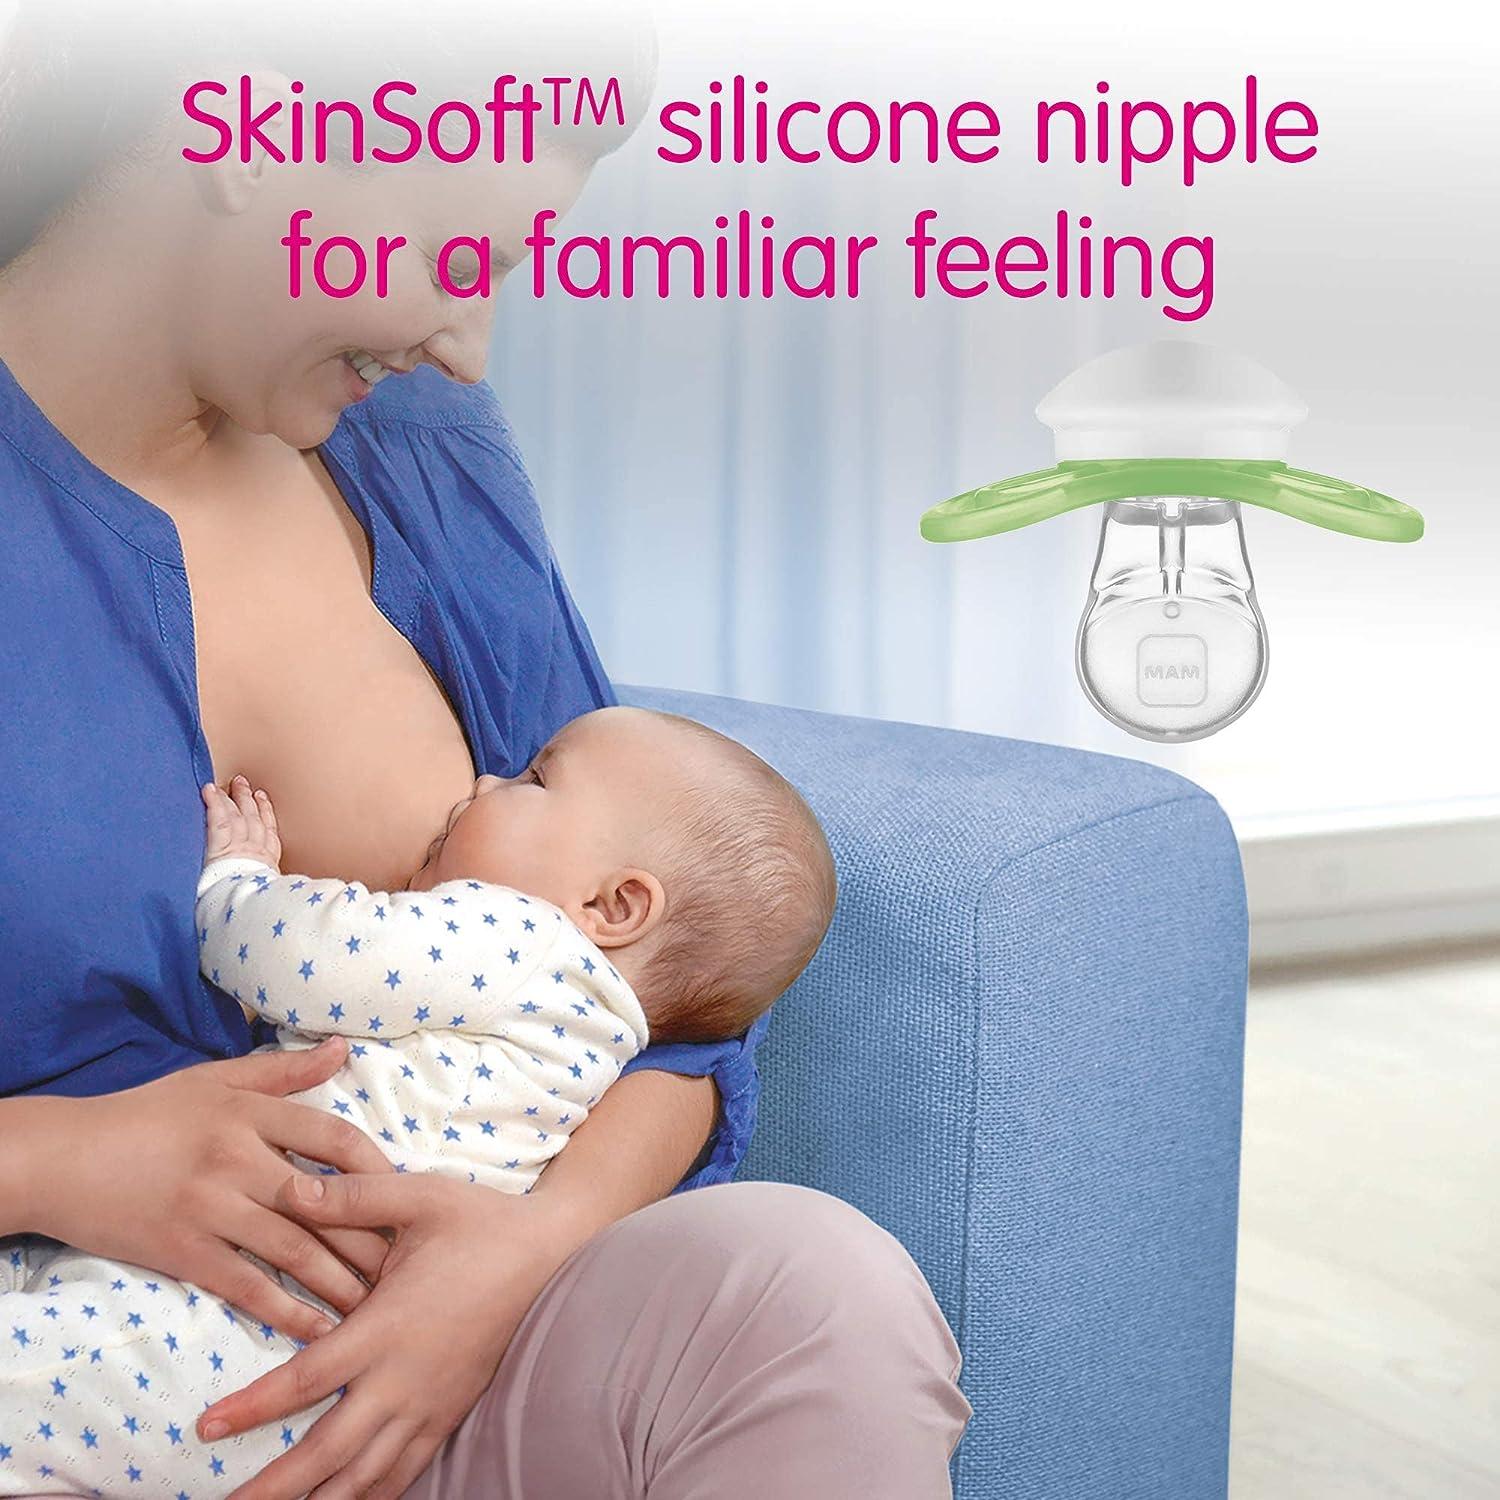 2 PACKS] MAM Teats for Newborns SkinSoft Silicone Nipples for Baby